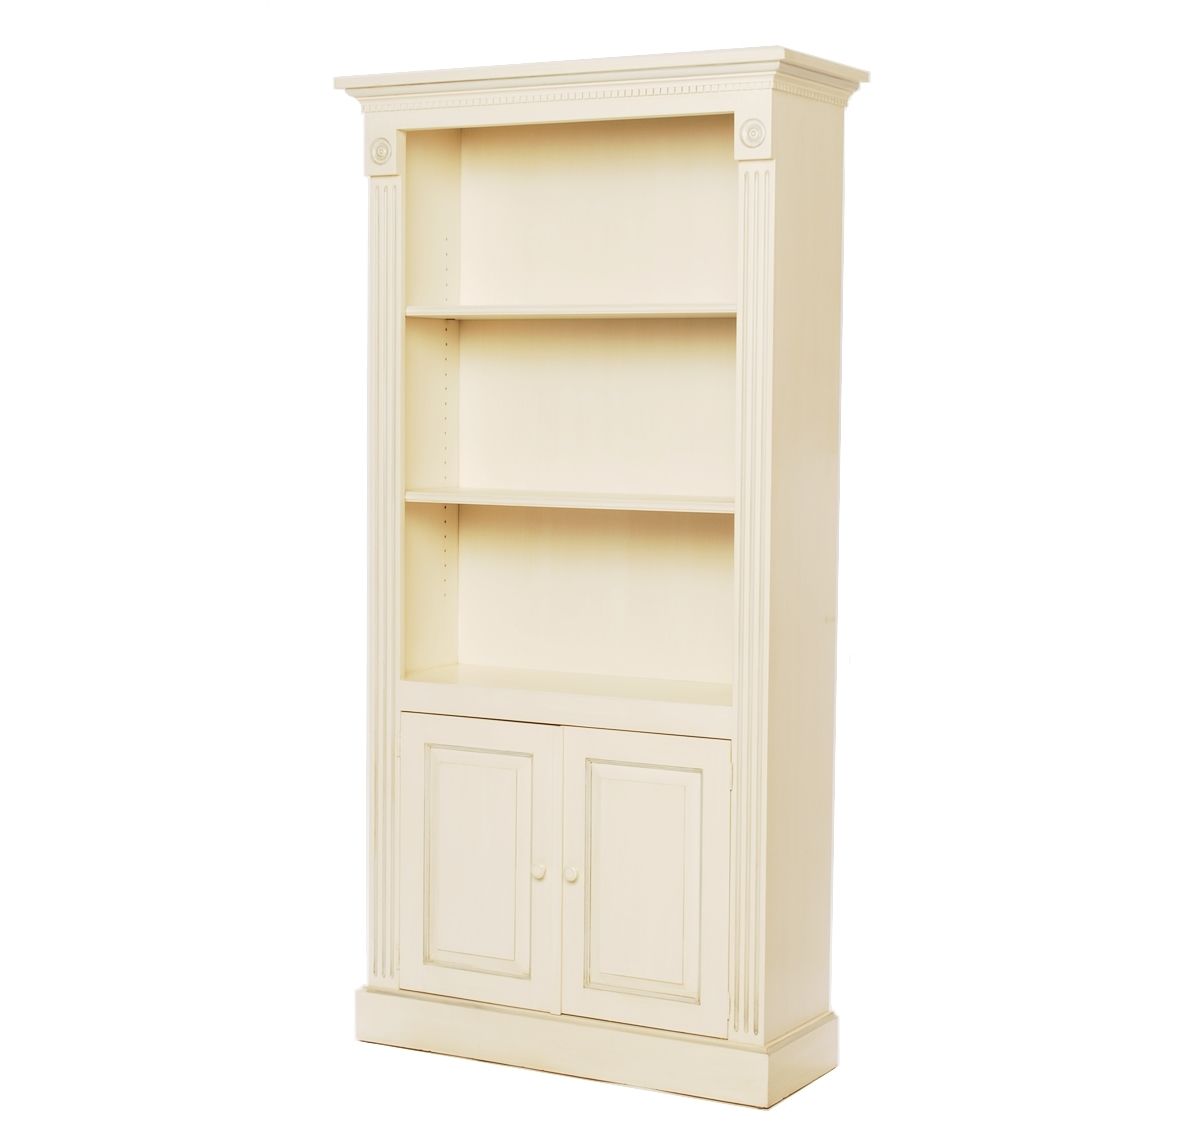 Trendy Bookcases With Doors And Drawers White Tall Narrow Bookcase Intended For Tall White Bookcases (View 12 of 15)